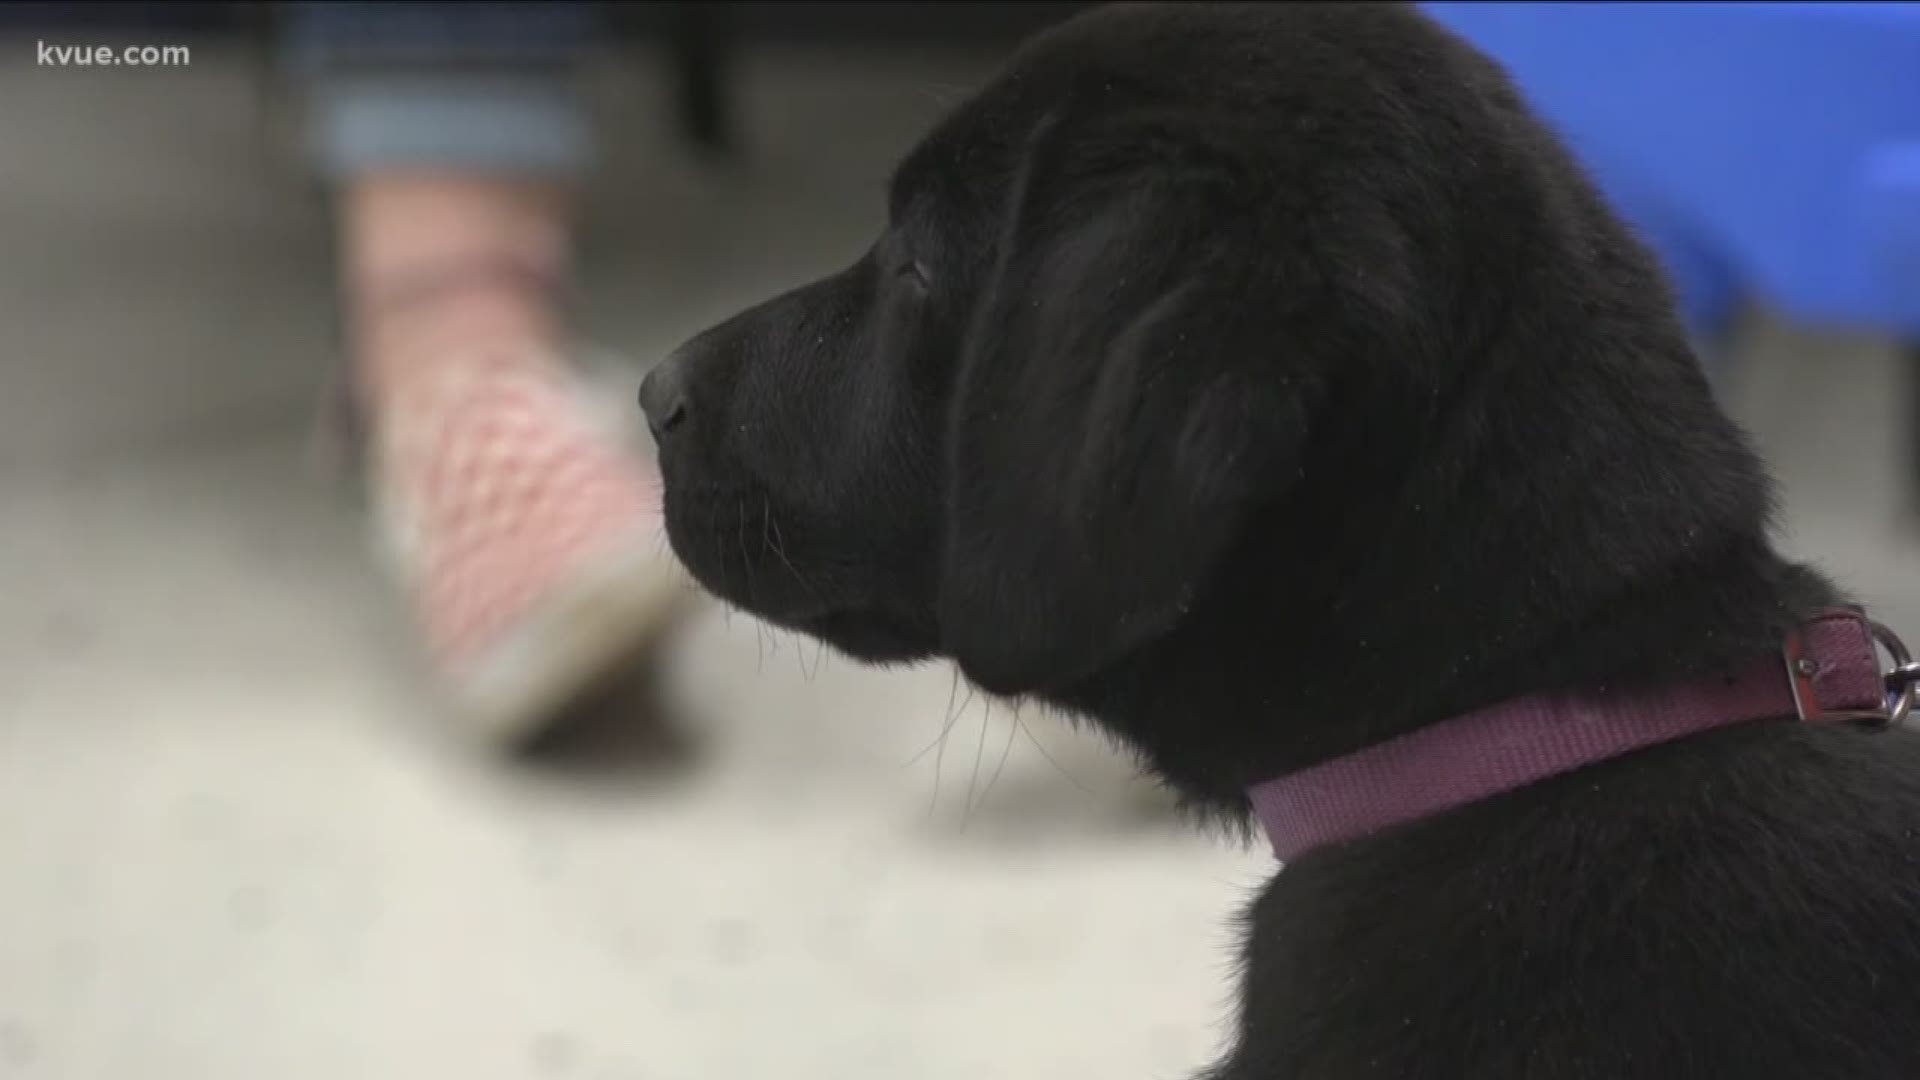 Wimberley High School has a unique spring semester program that is giving students the chance to train puppies to eventually become diabetic alert dogs.